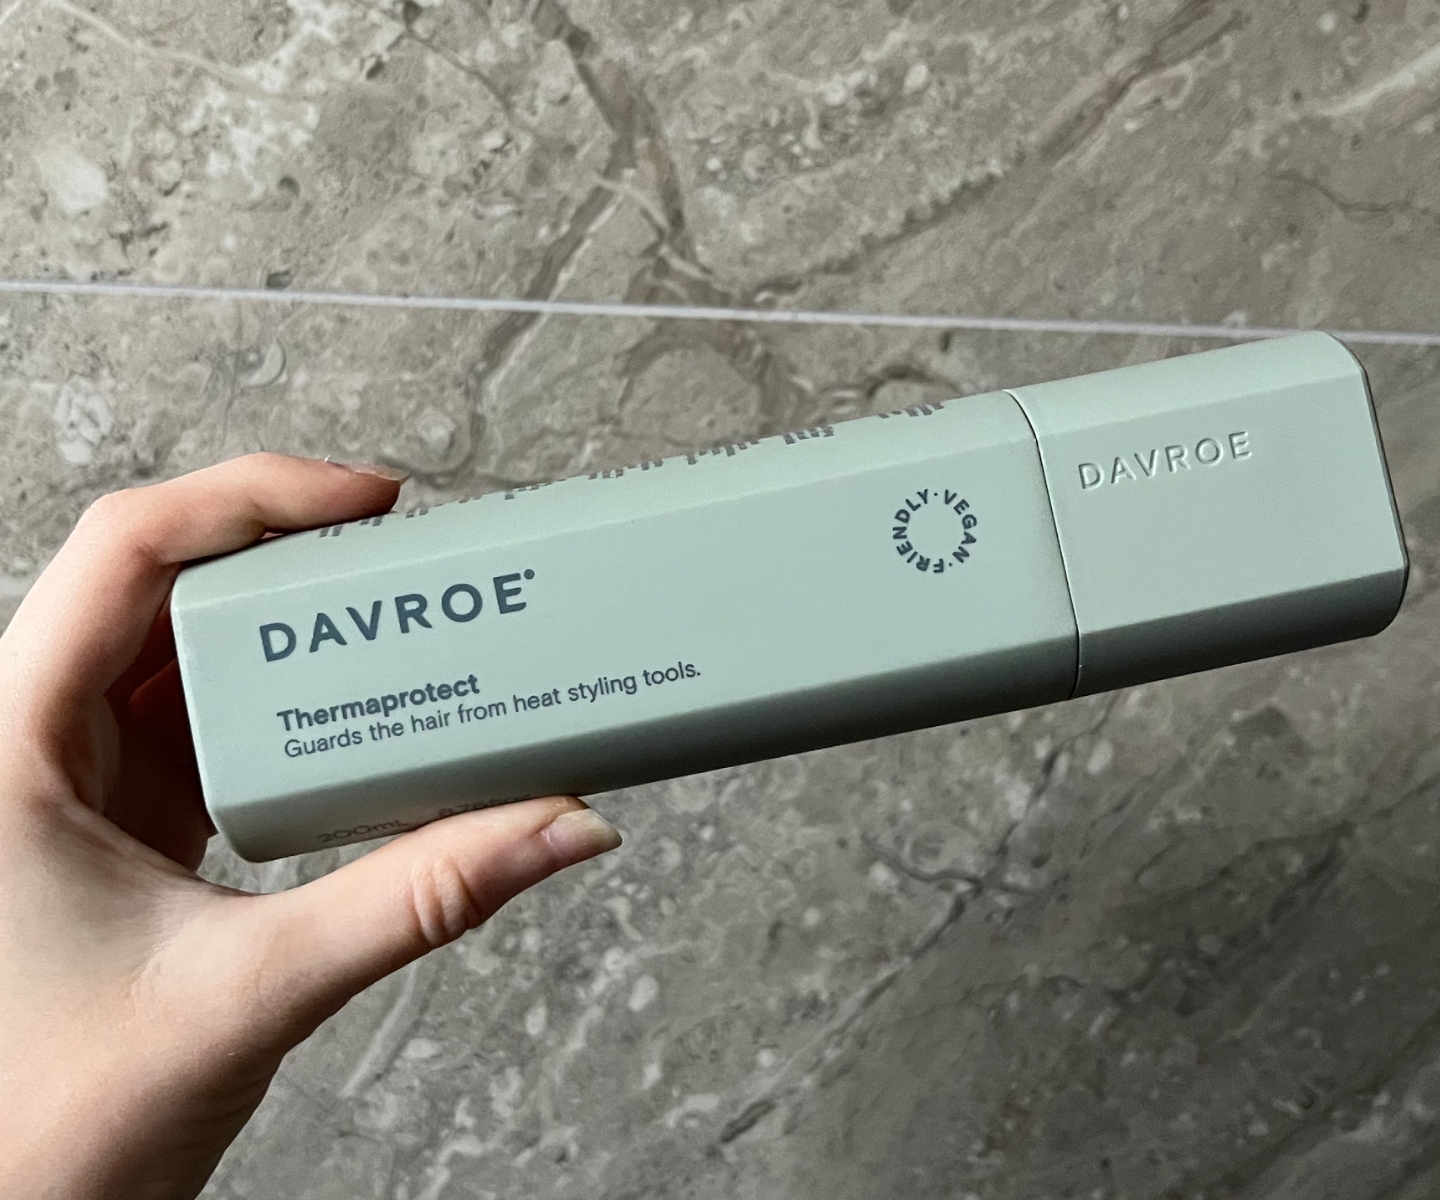 Davroe Thermaprotect in-article